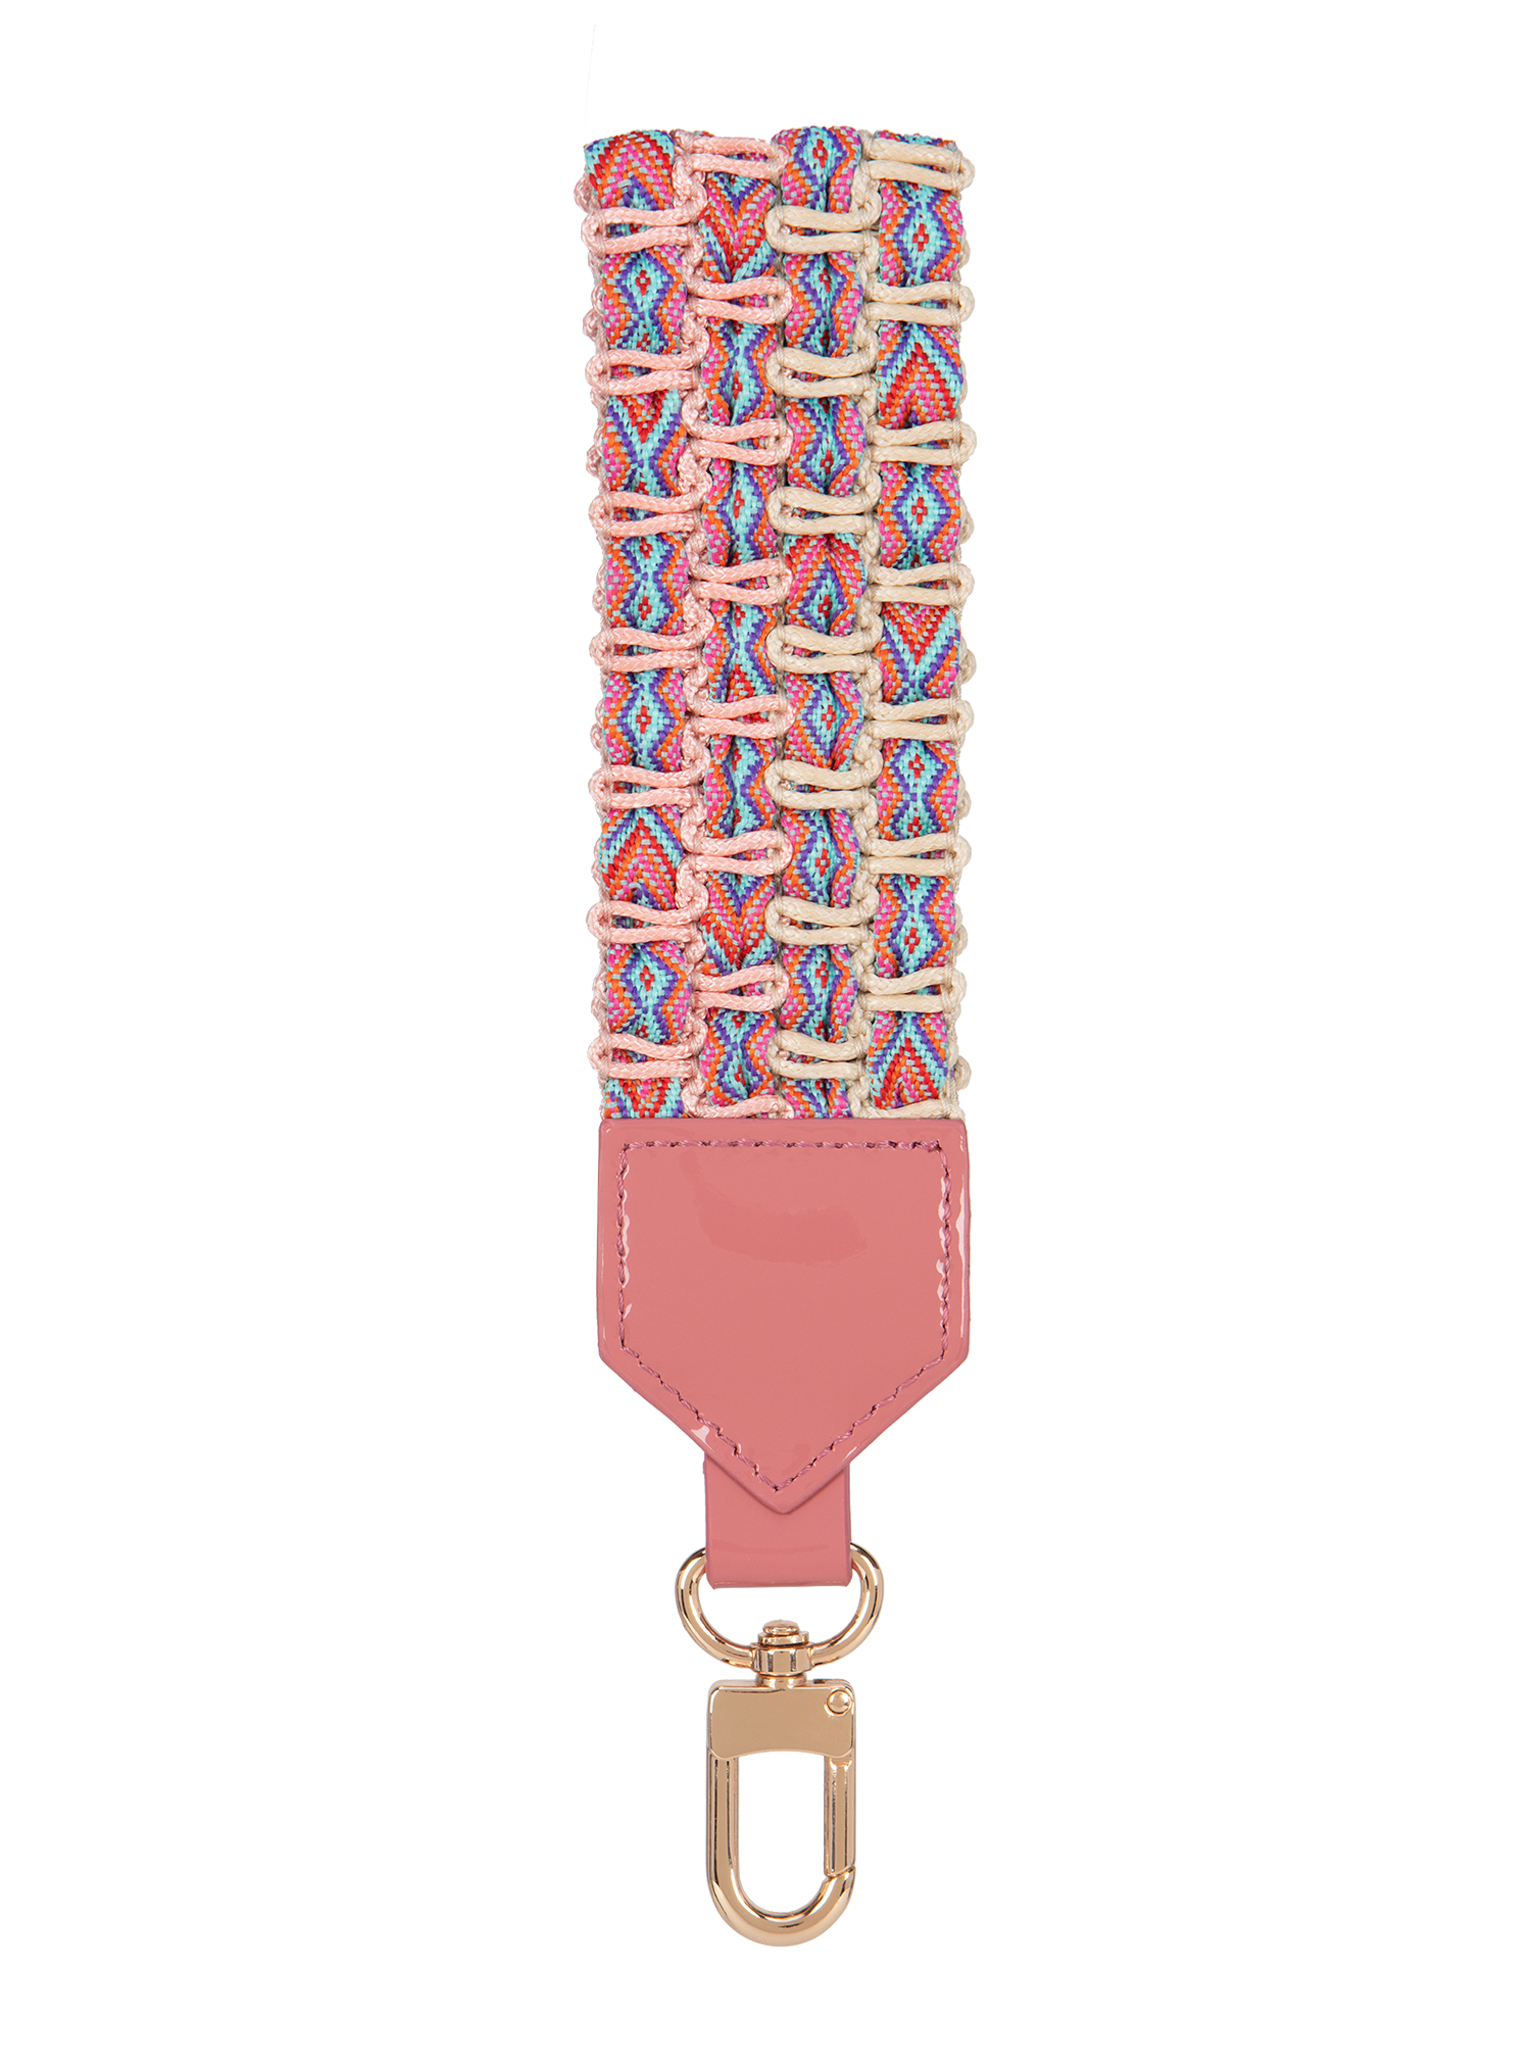 Back View of Keep on Cruisin Keychain in Rose 